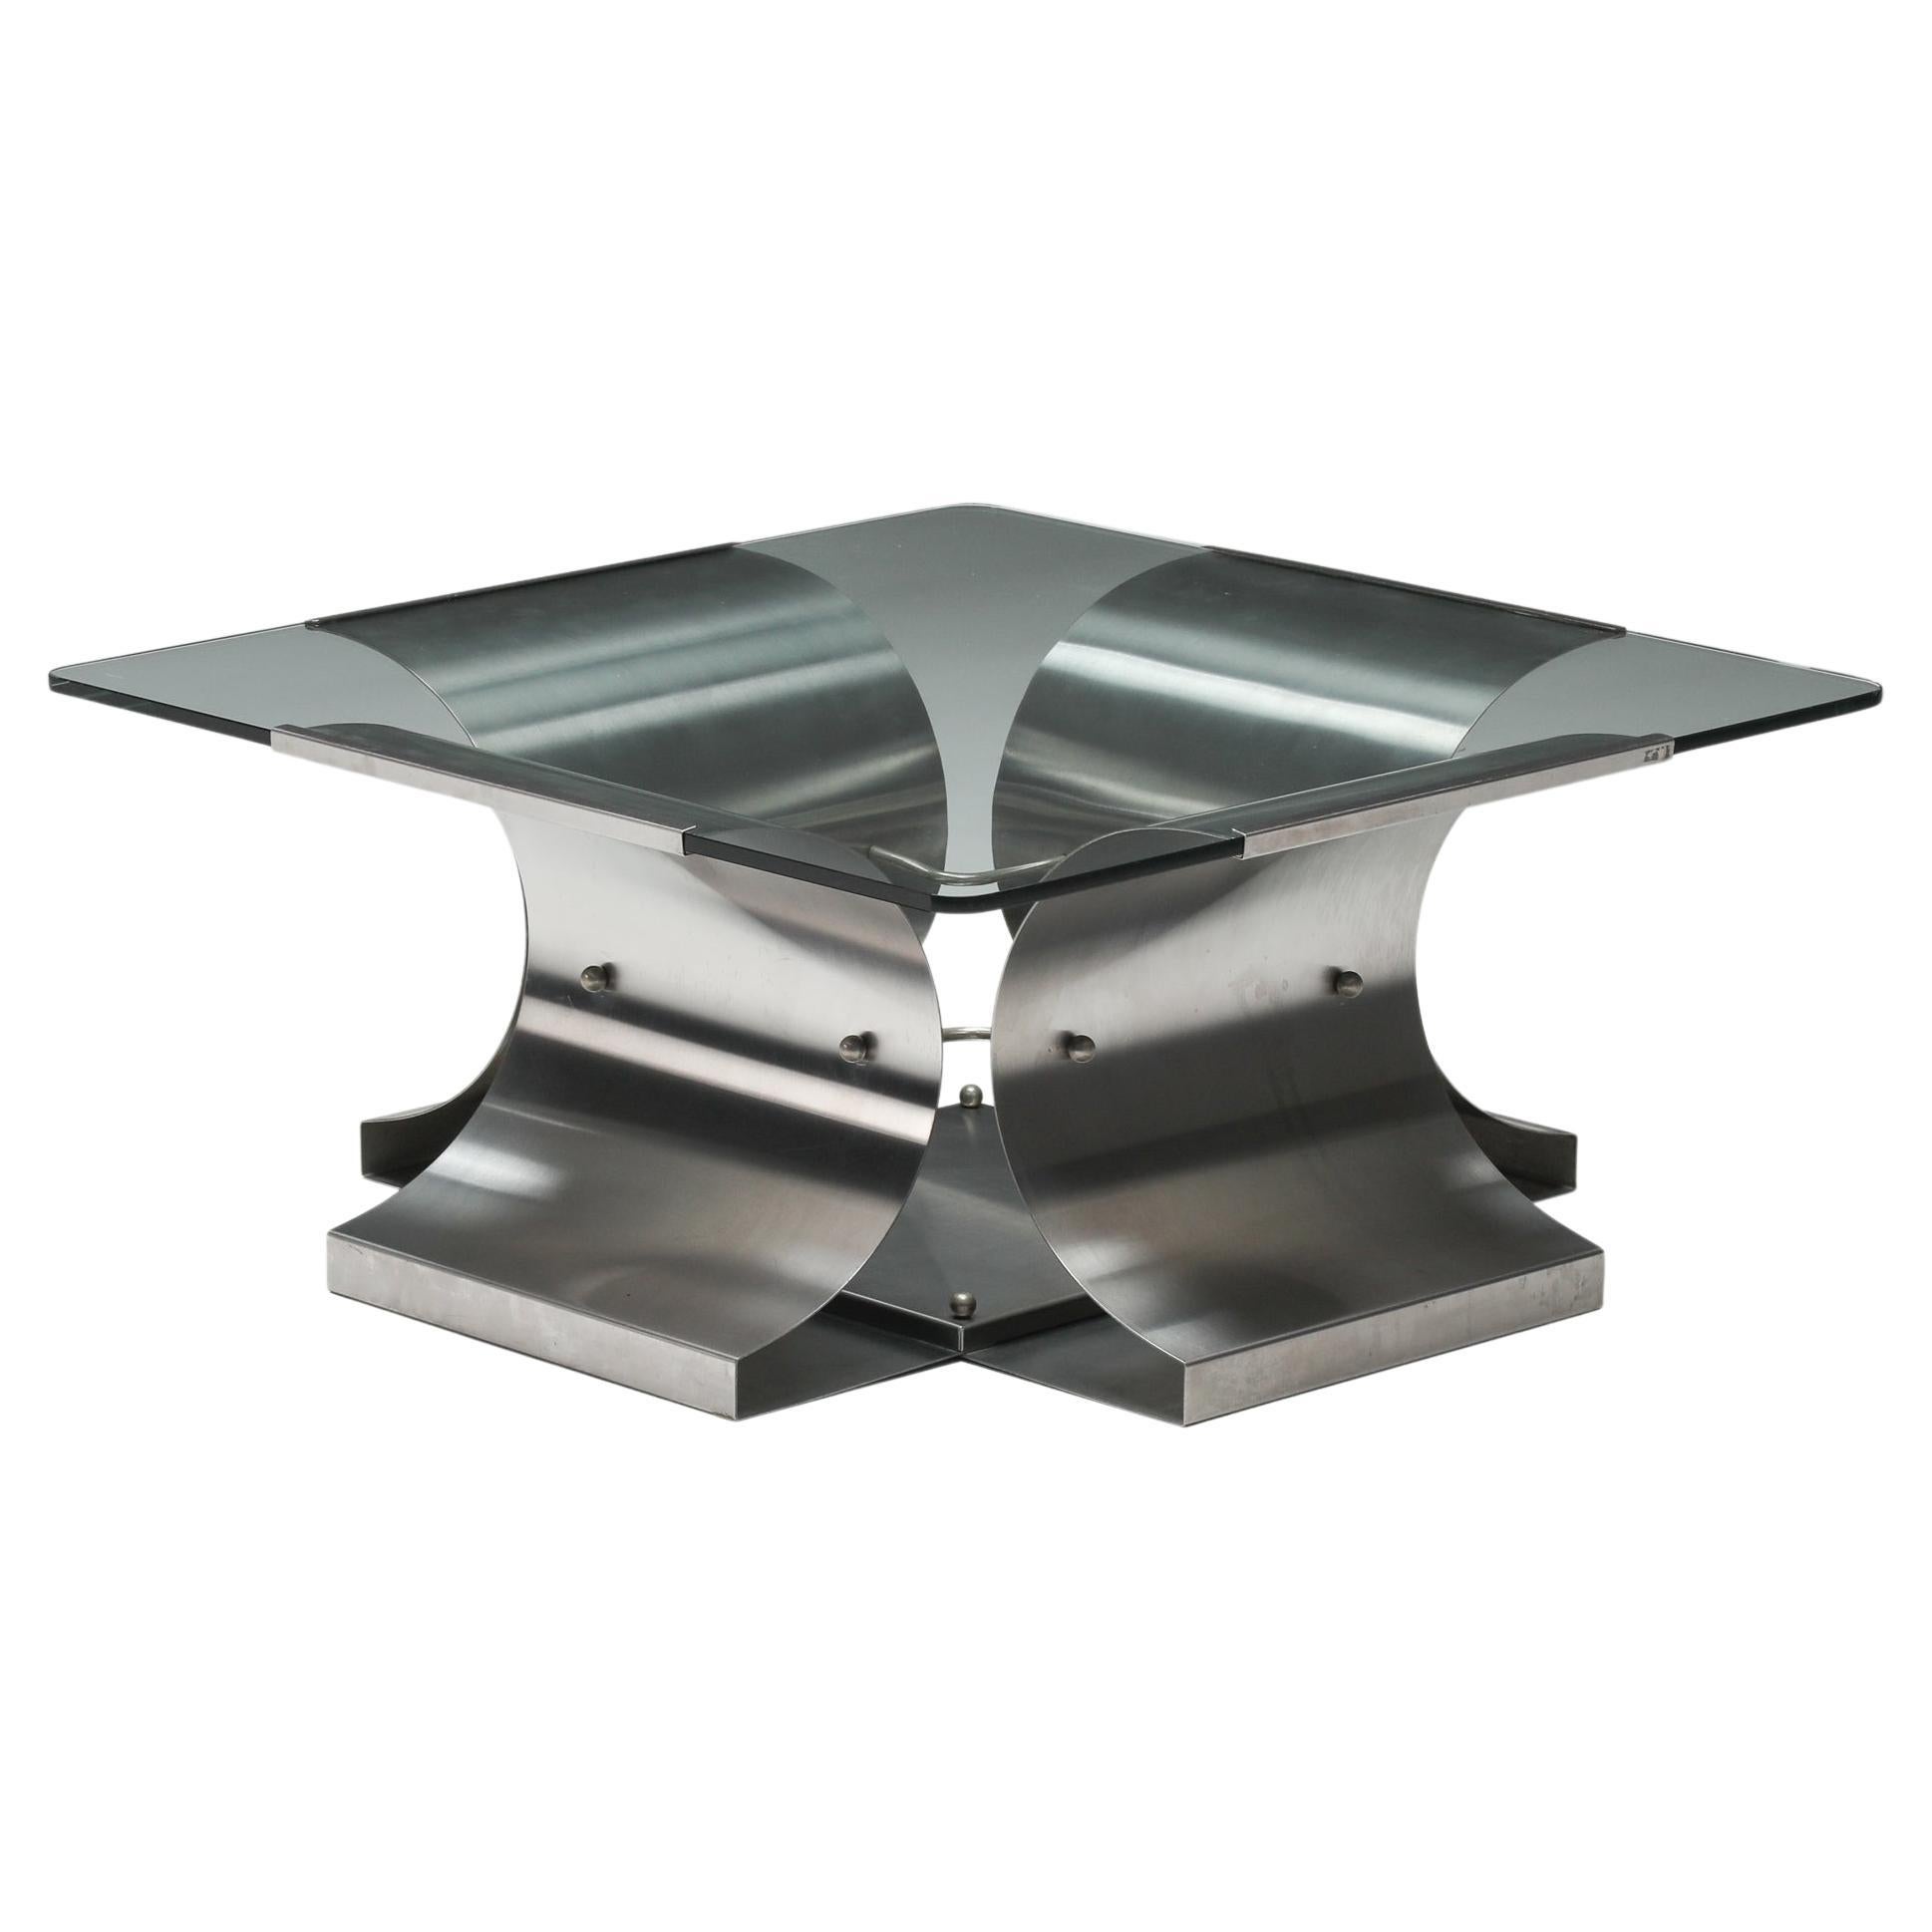 Oscar Niemeyer Inspired Square Glass & Metal Coffee Table, Architectural, 1970's